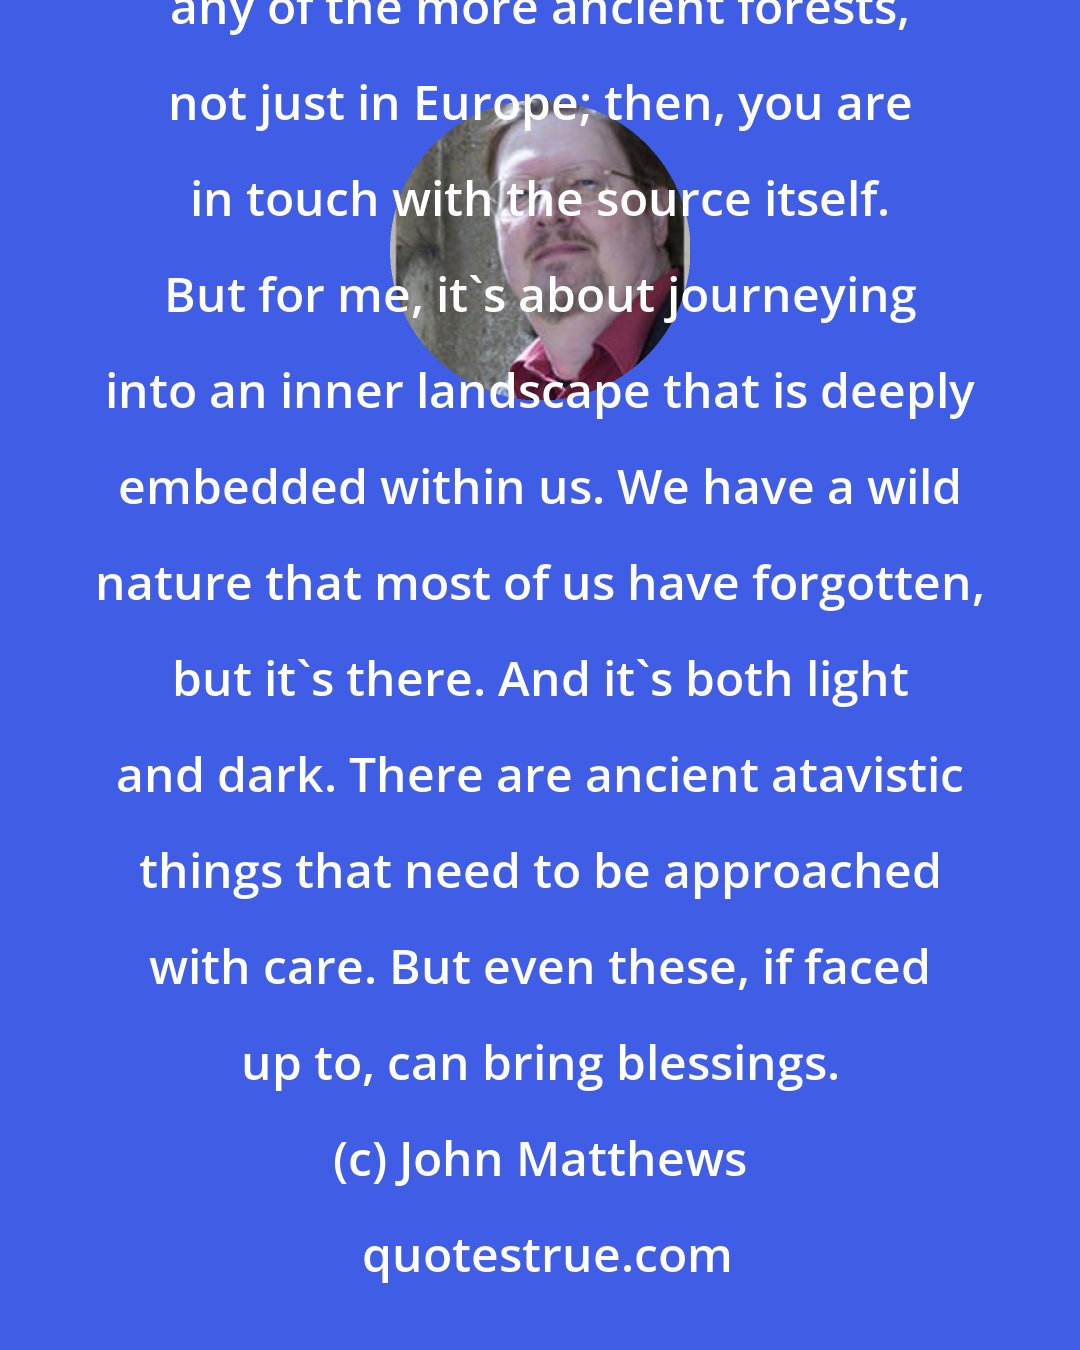 John Matthews: The wildwood is everywhere. It's inside us. It's outside us. And, of course, if you happen to be near any of the more ancient forests, not just in Europe; then, you are in touch with the source itself. But for me, it's about journeying into an inner landscape that is deeply embedded within us. We have a wild nature that most of us have forgotten, but it's there. And it's both light and dark. There are ancient atavistic things that need to be approached with care. But even these, if faced up to, can bring blessings.